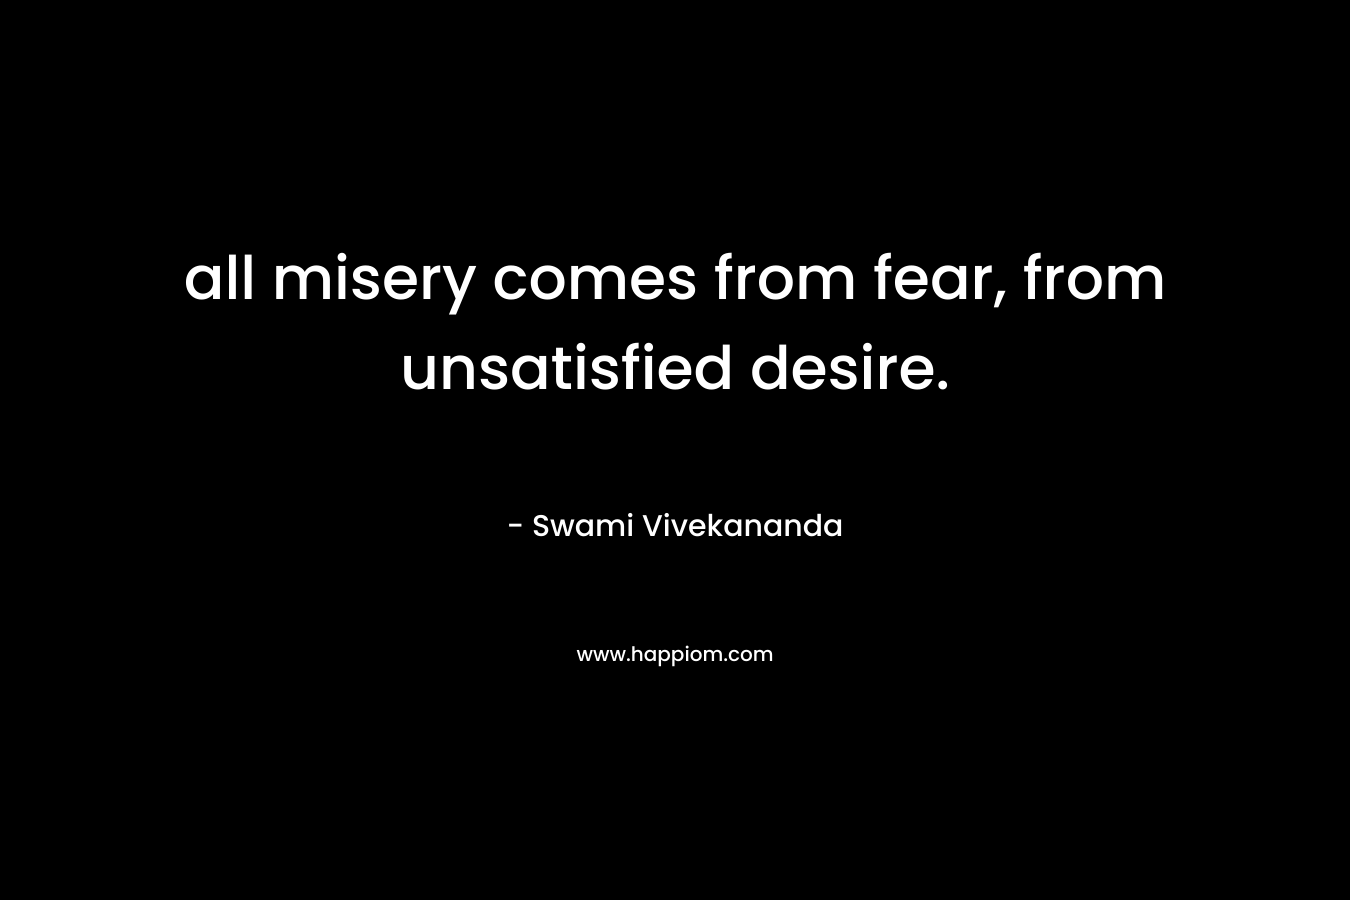 all misery comes from fear, from unsatisfied desire.